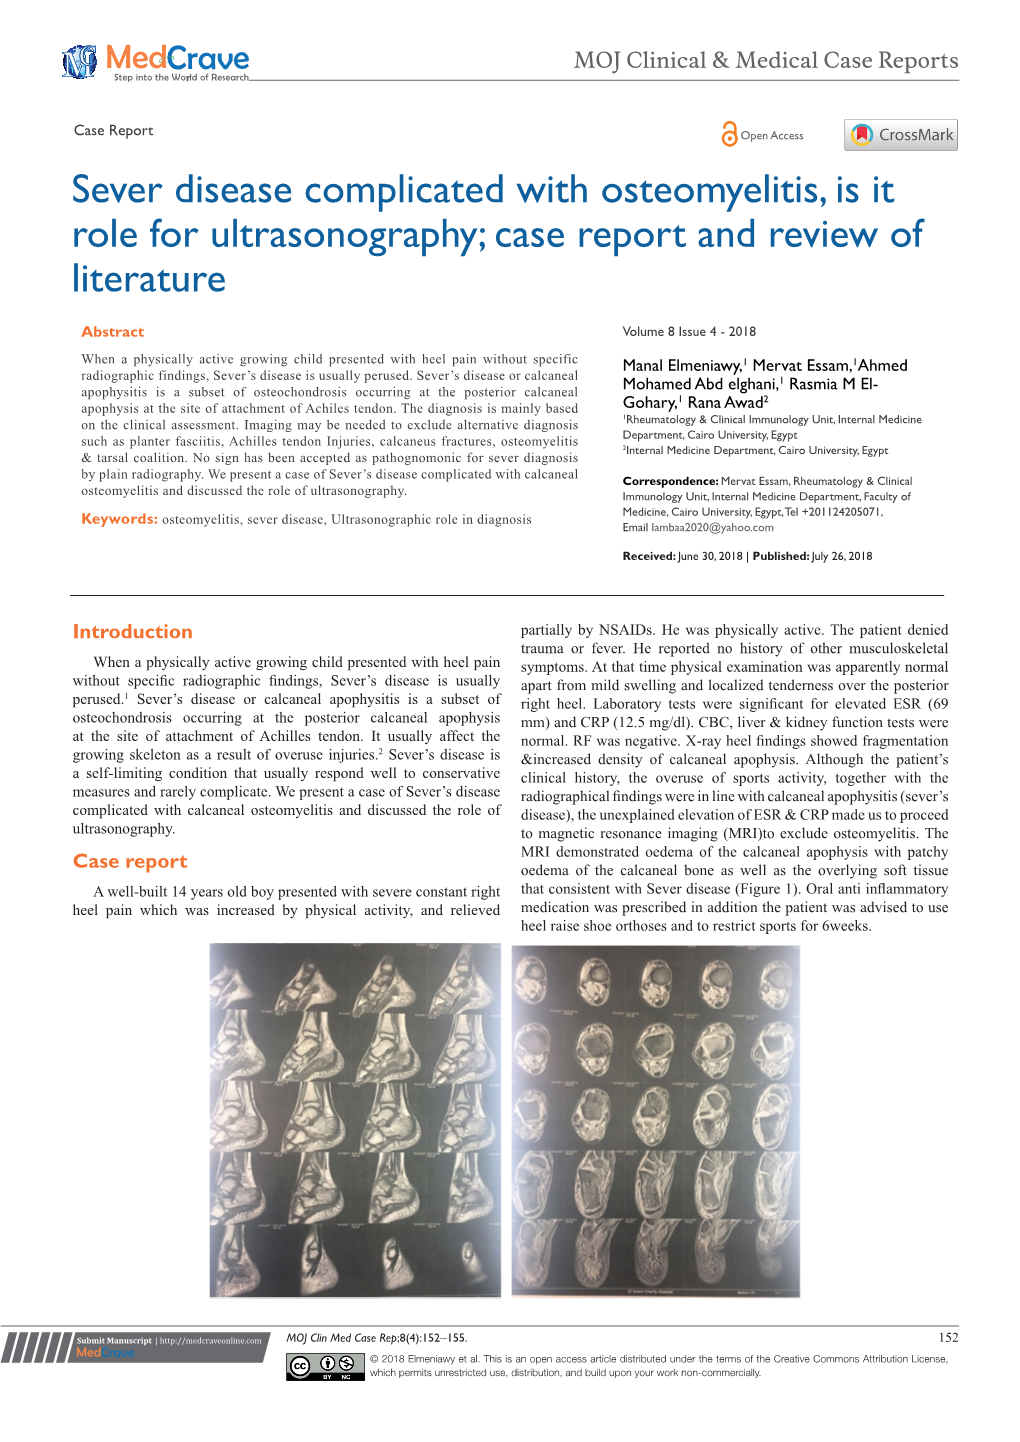 Sever Disease Complicated with Osteomyelitis, Is It Role for Ultrasonography; Case Report and Review of Literature